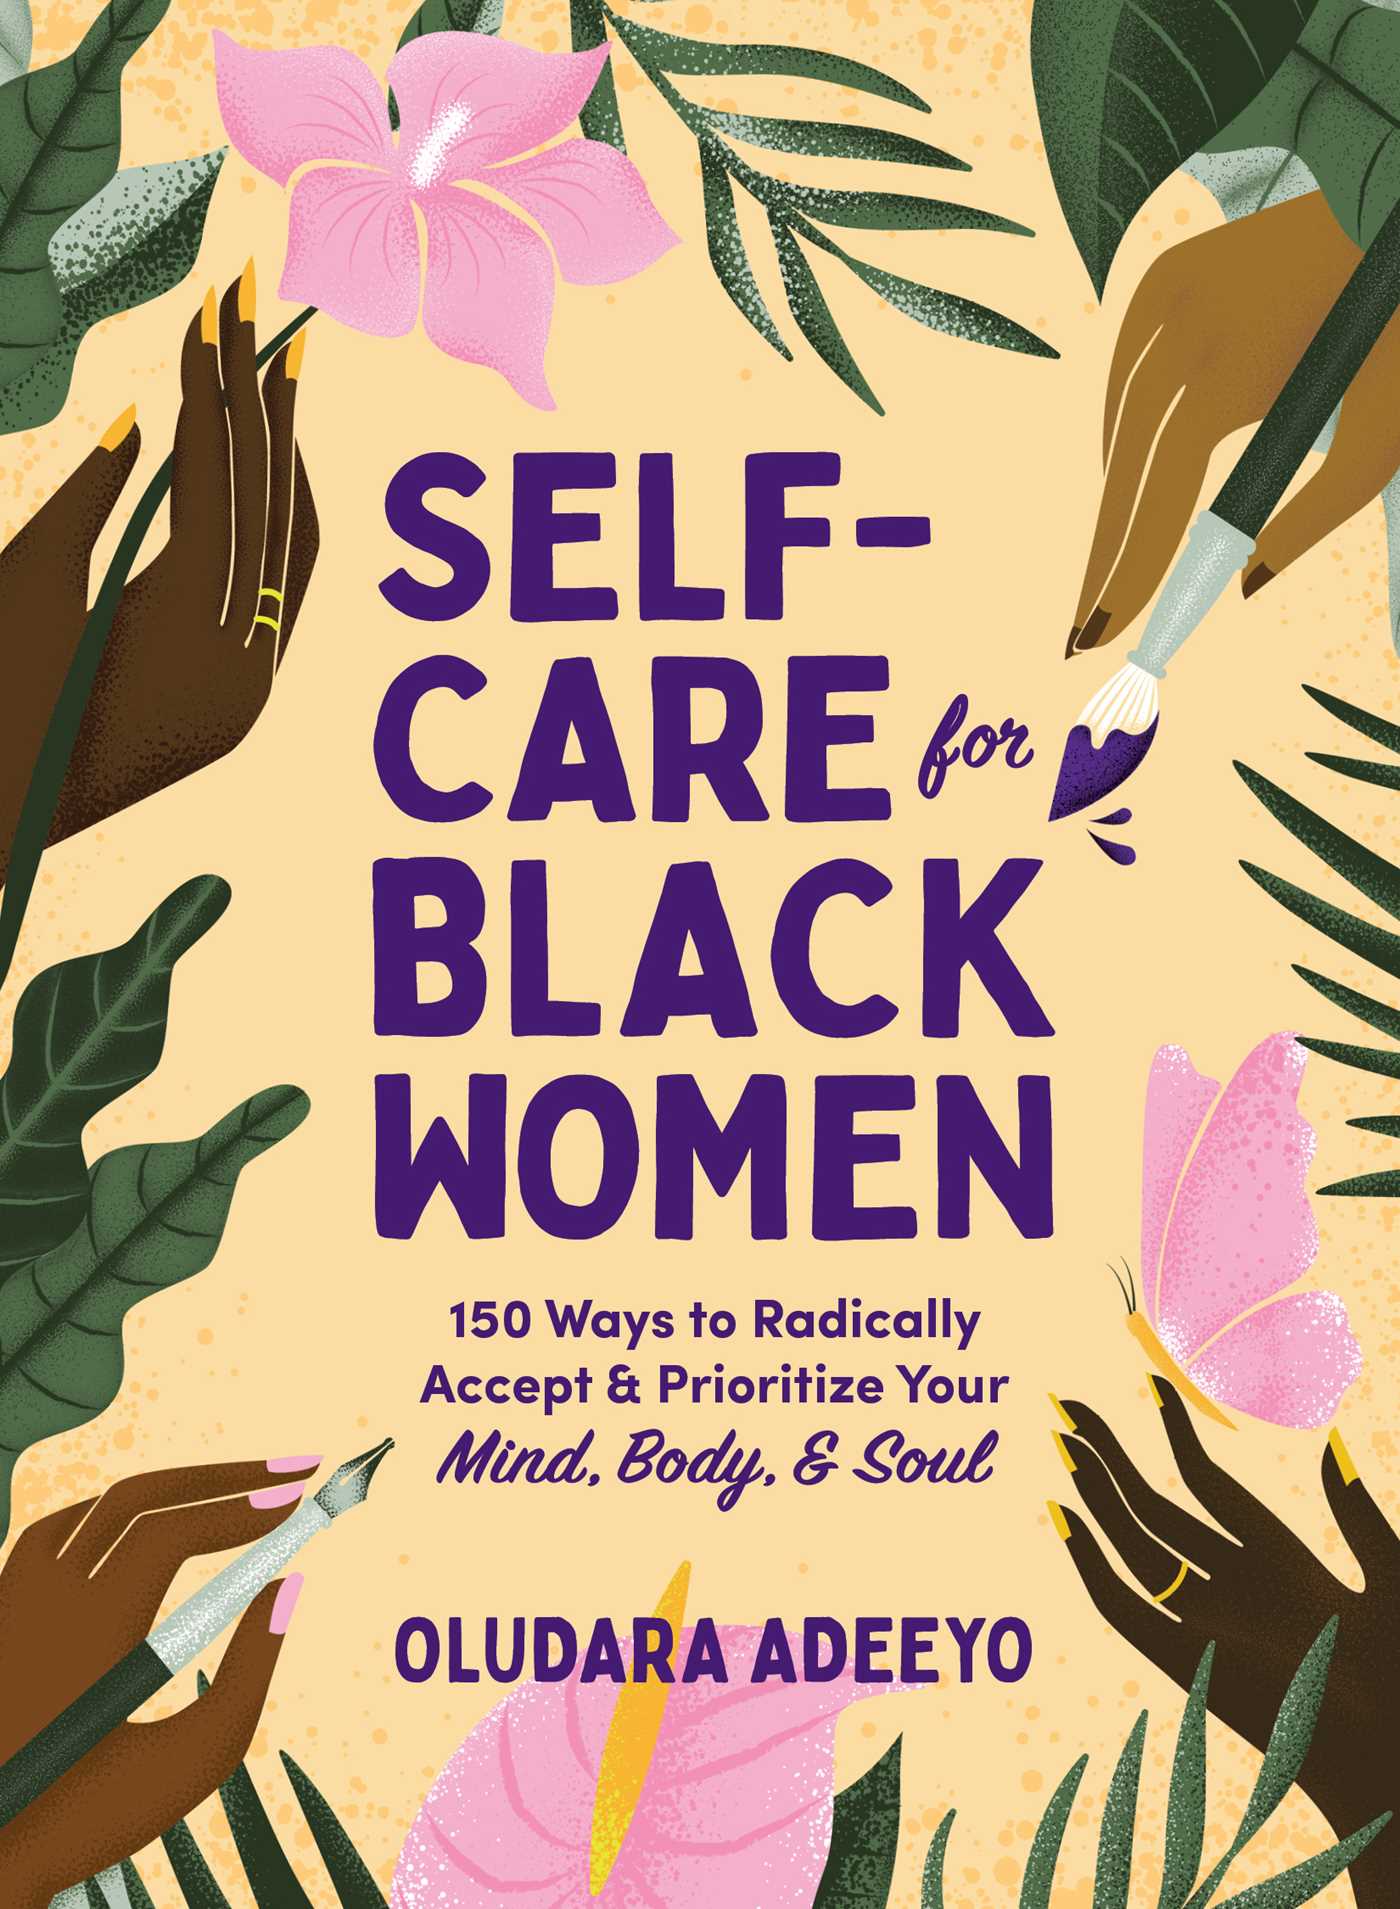 Self-Care for Black Women // 150 Ways to Radically Accept & Prioritize Your Mind, Body, & Soul